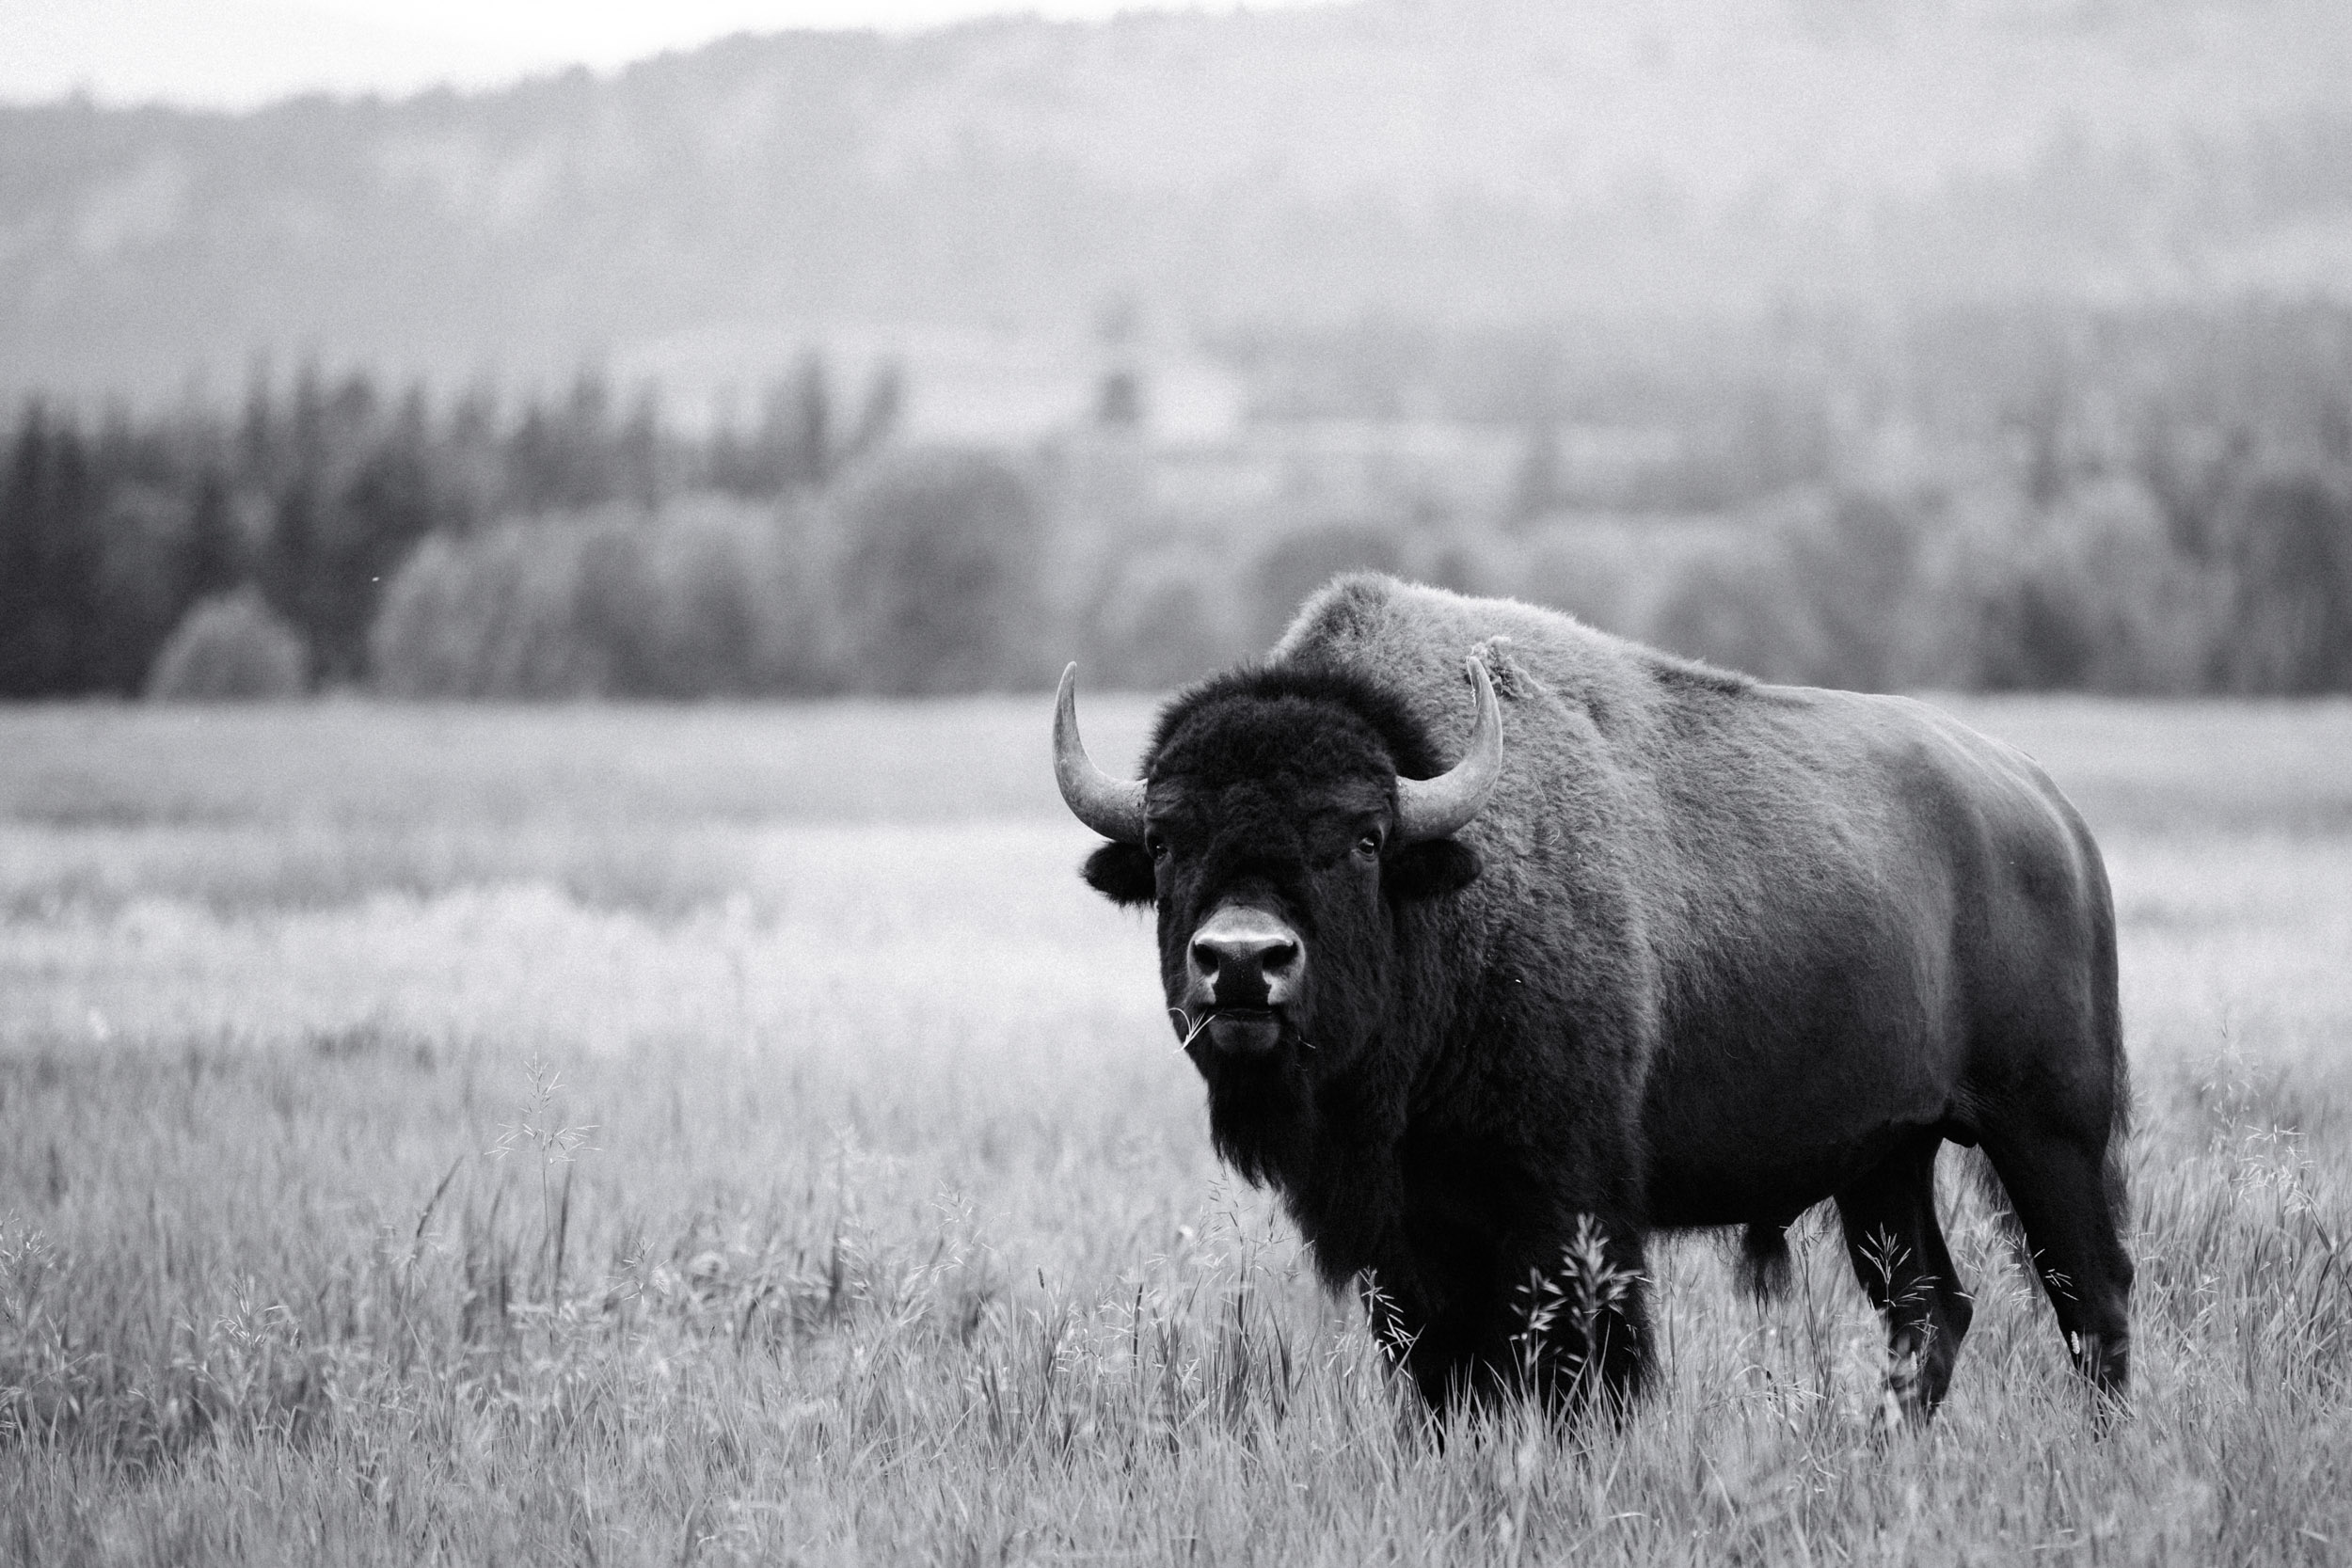 This bison is interested in just finishing his meal in peace, thank you